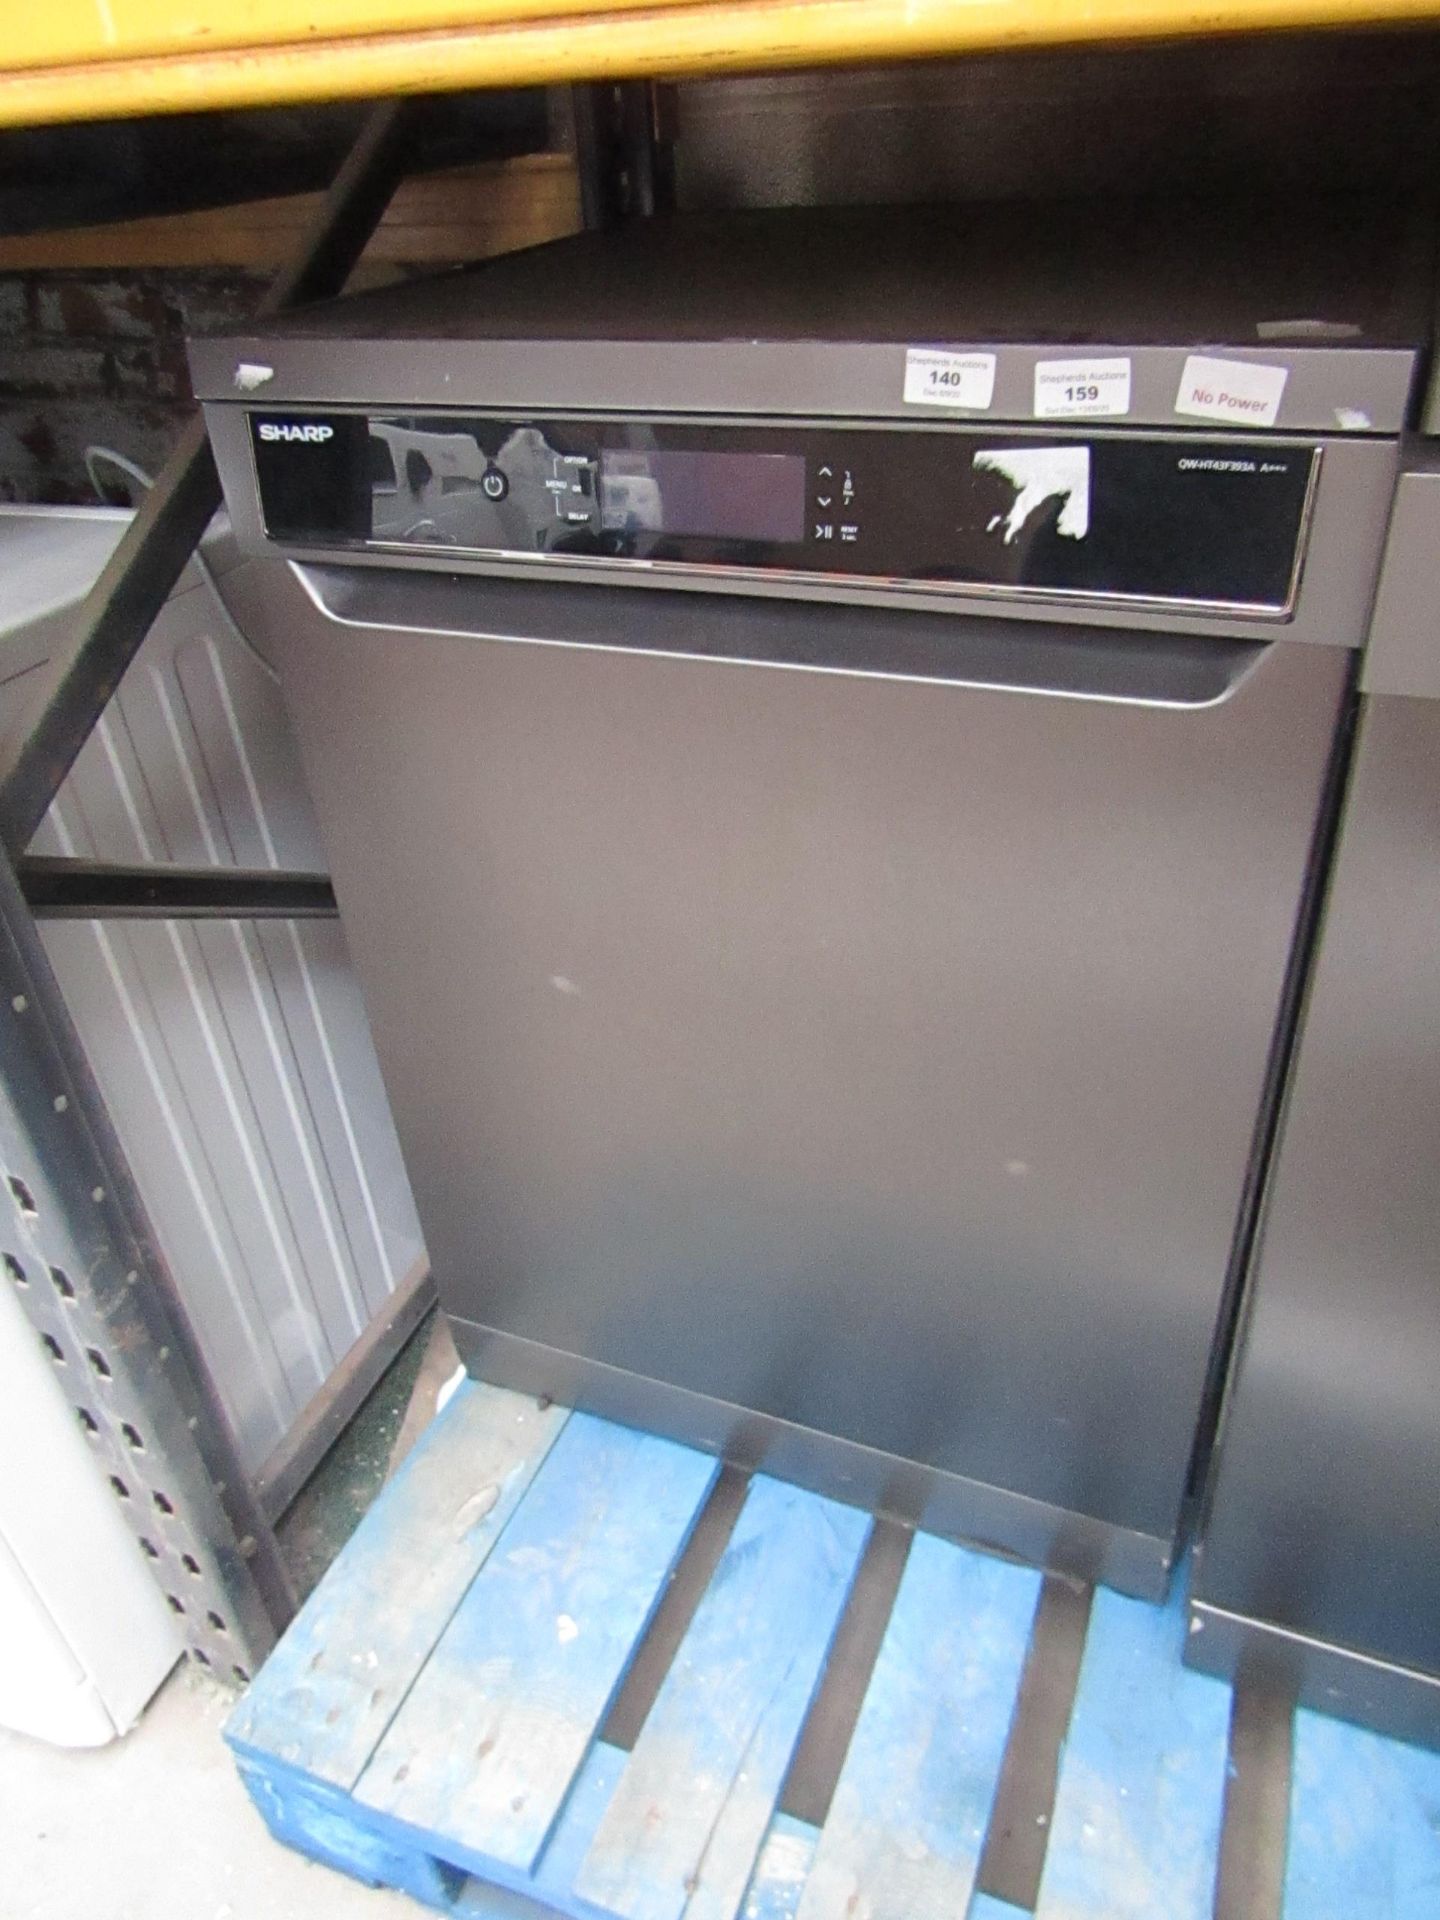 Sharp QW-HT43F393A dish washer, no power when plugged in